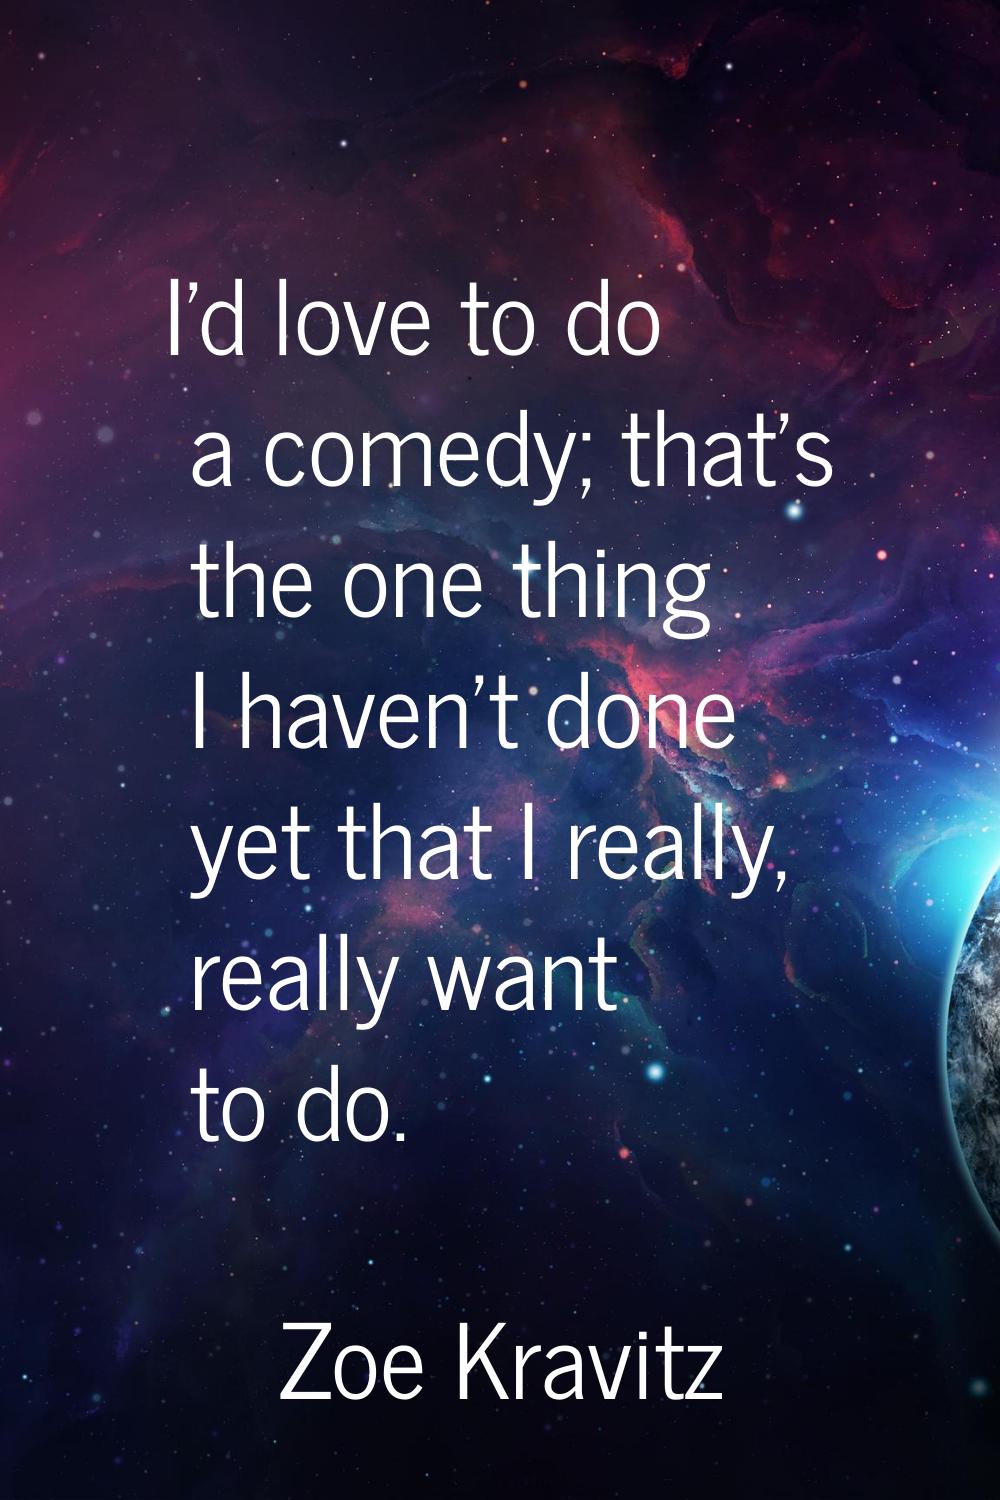 I'd love to do a comedy; that's the one thing I haven't done yet that I really, really want to do.